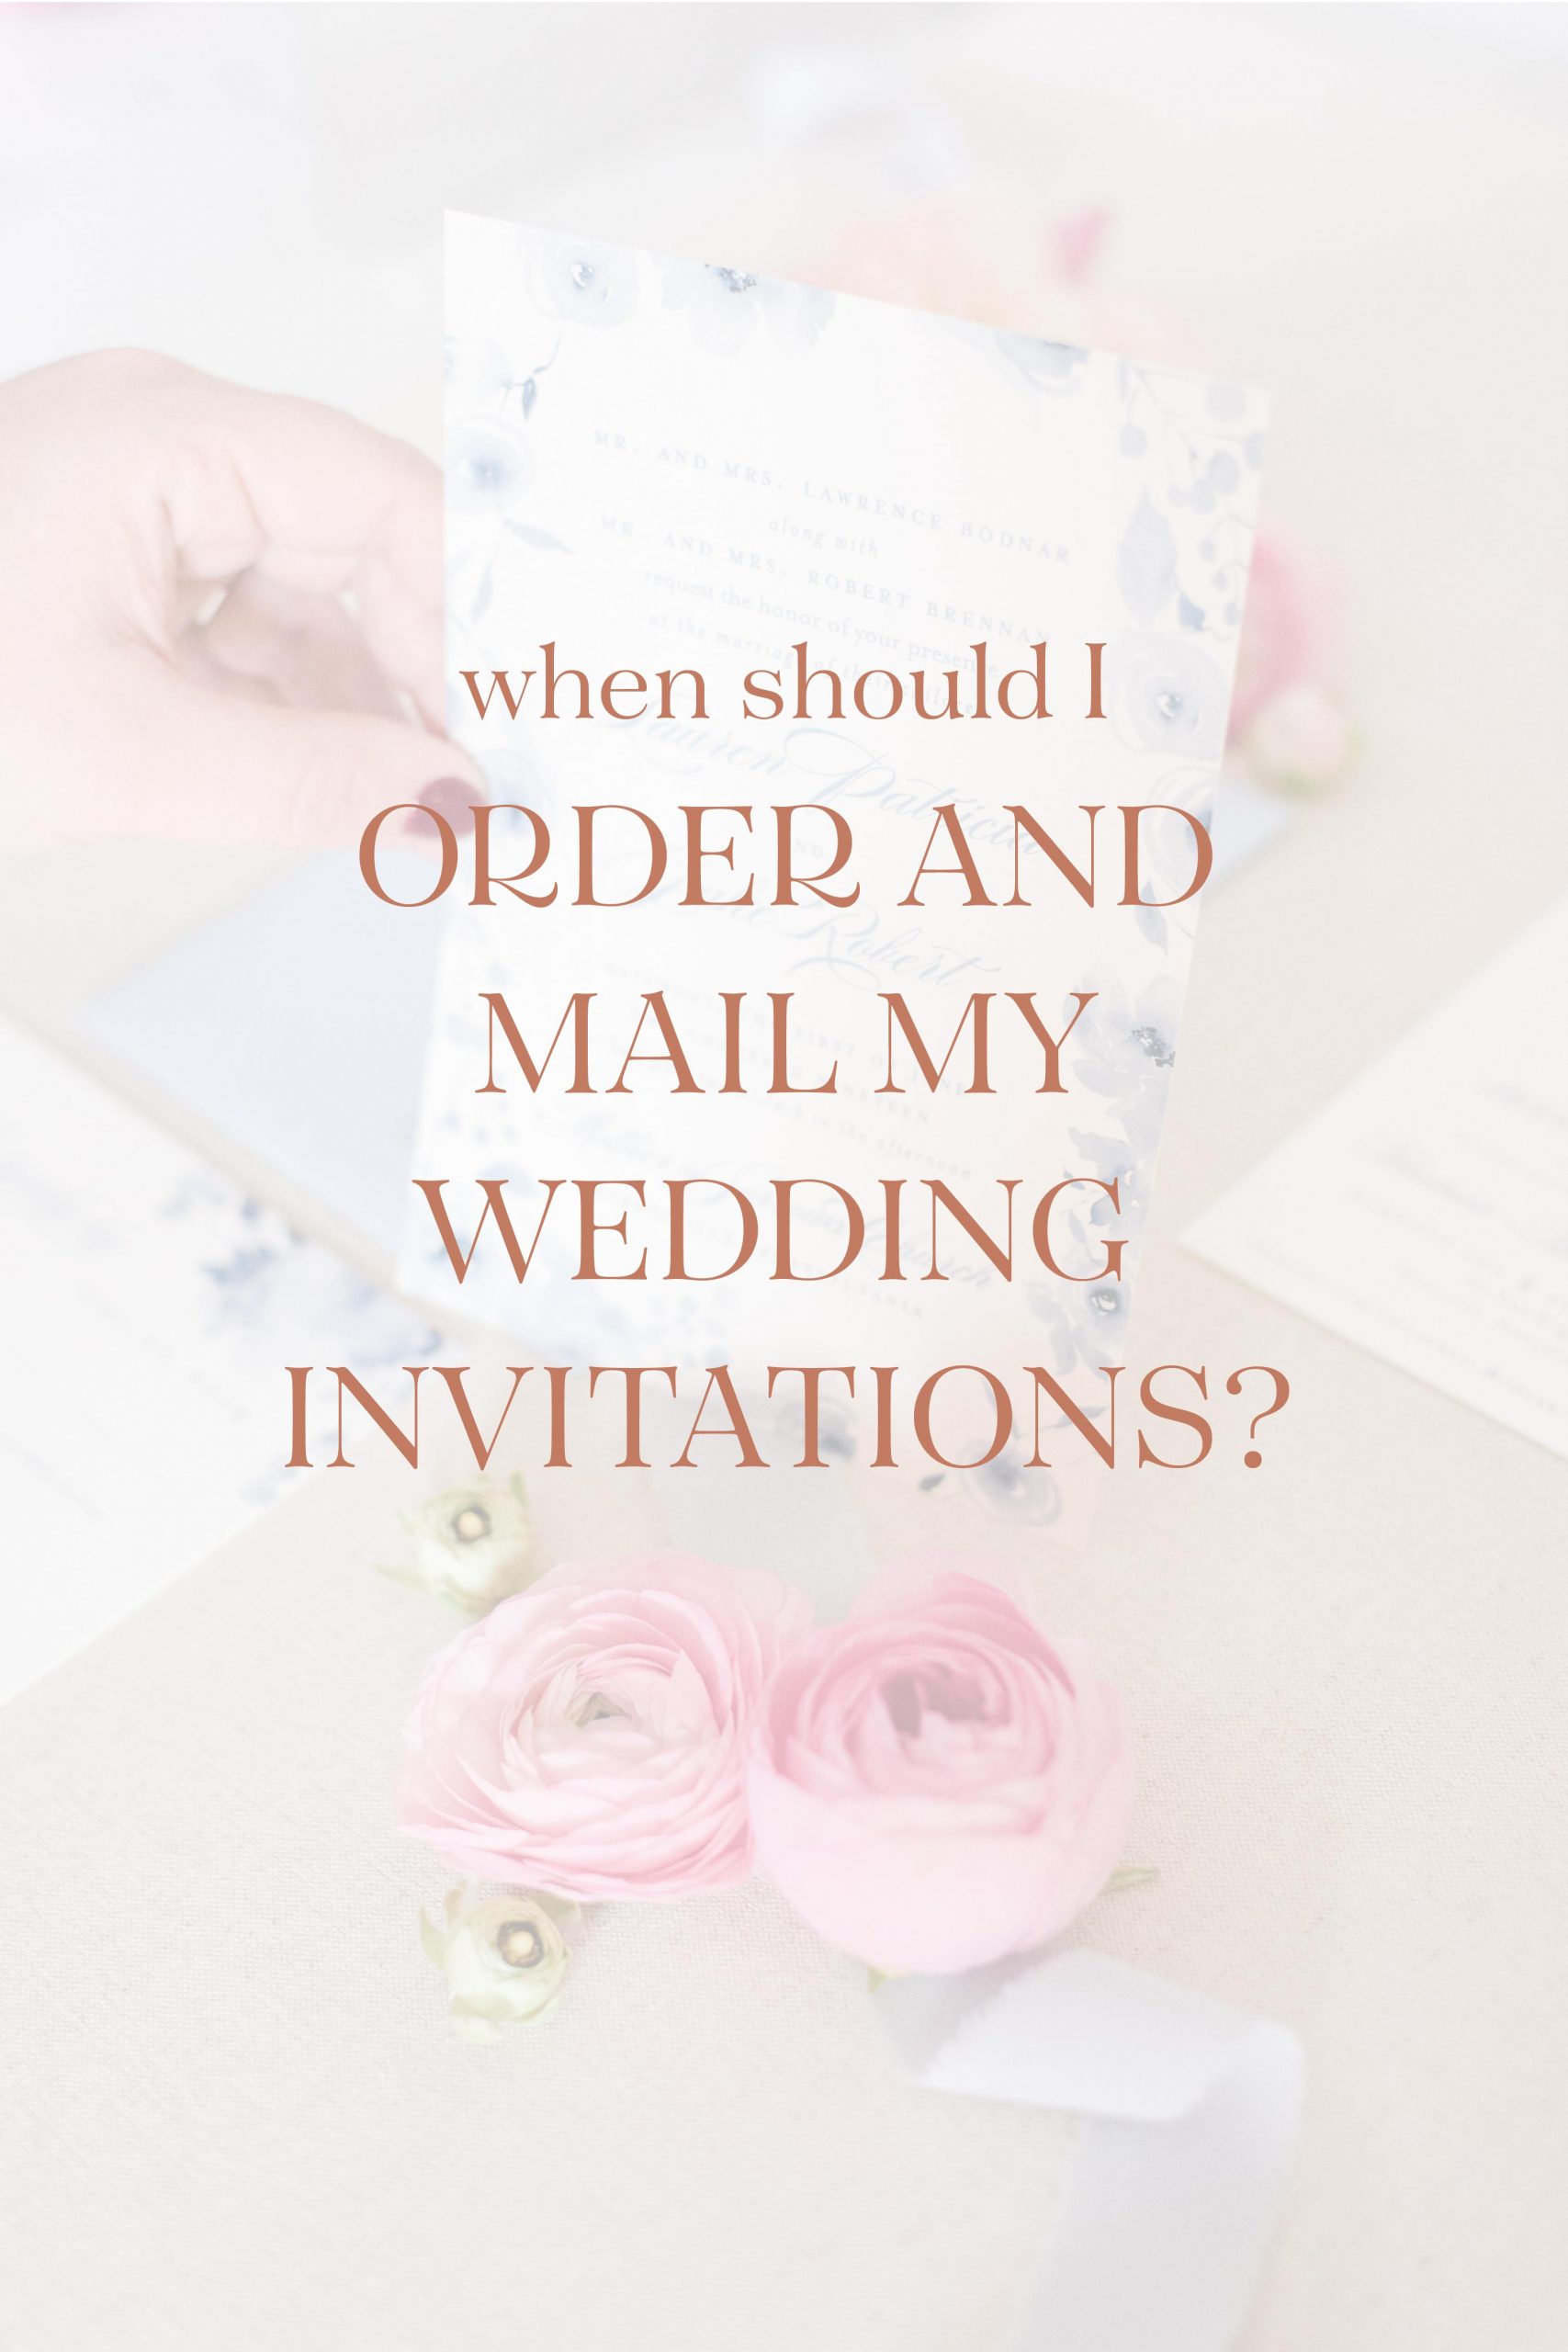 When to order and mail wedding invitations